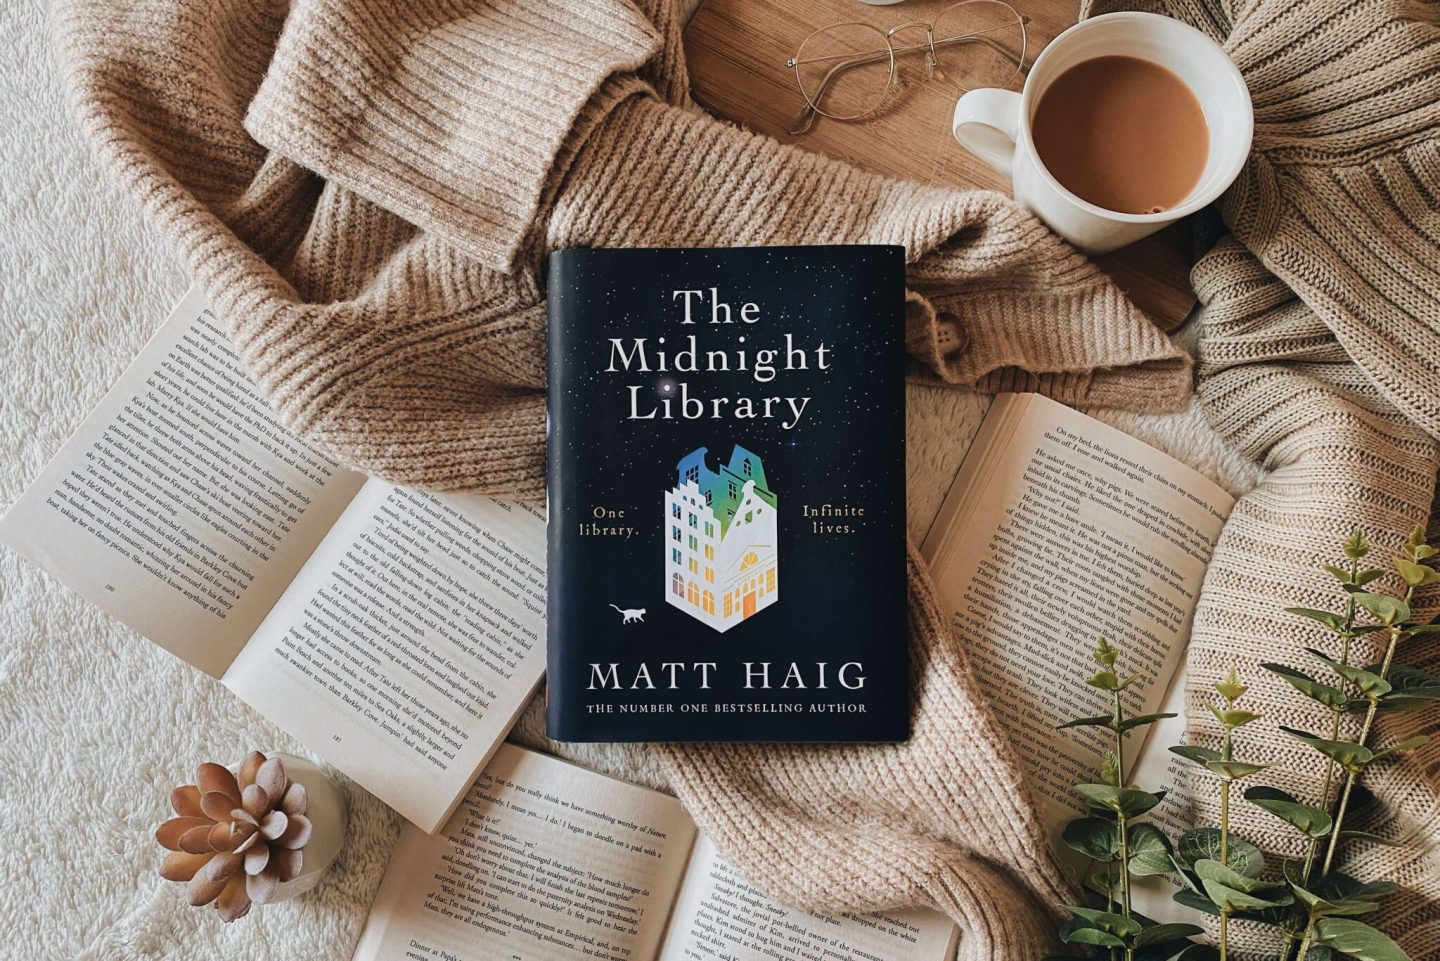 The Midnight Library' by Matt Haig Tells the Tale of Mental Health and  Self-Reflection